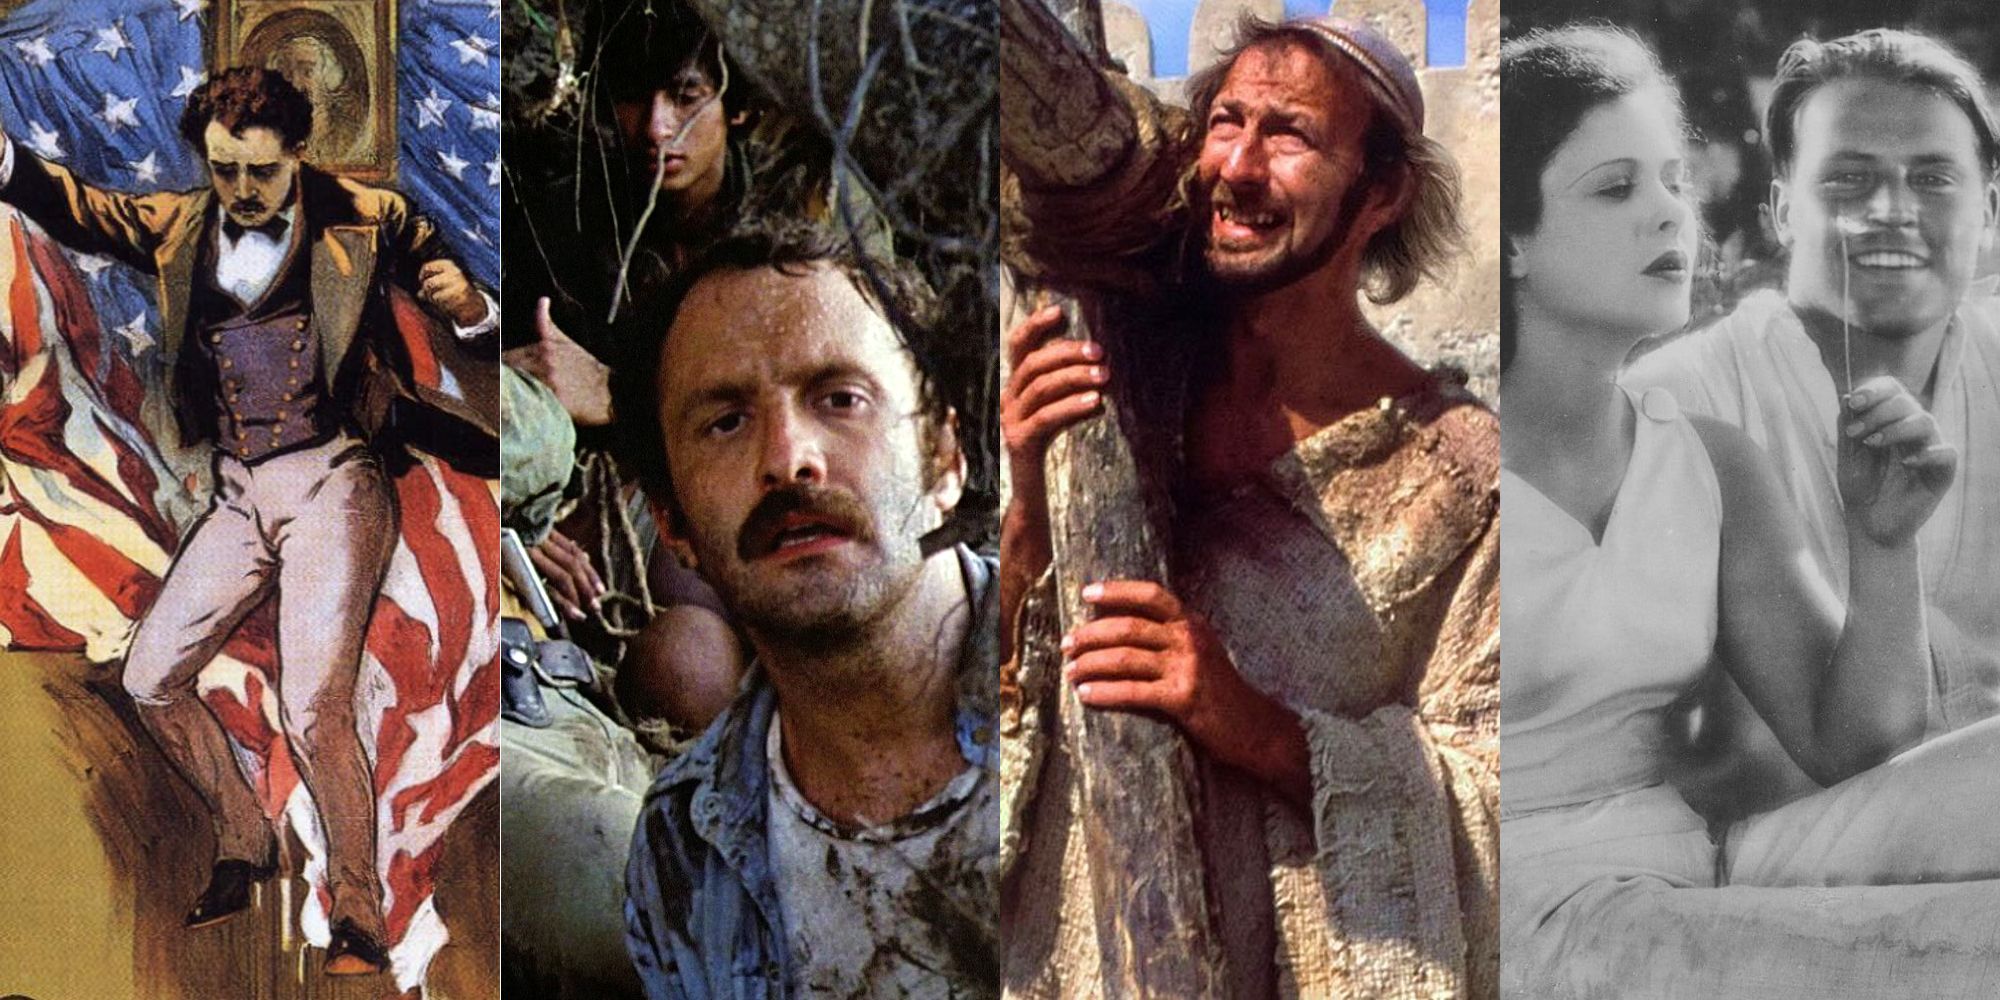 Split image: Scenes from Birth of a Nation, Cannibal Holocaust, Life of Brian, and Ecstacy.